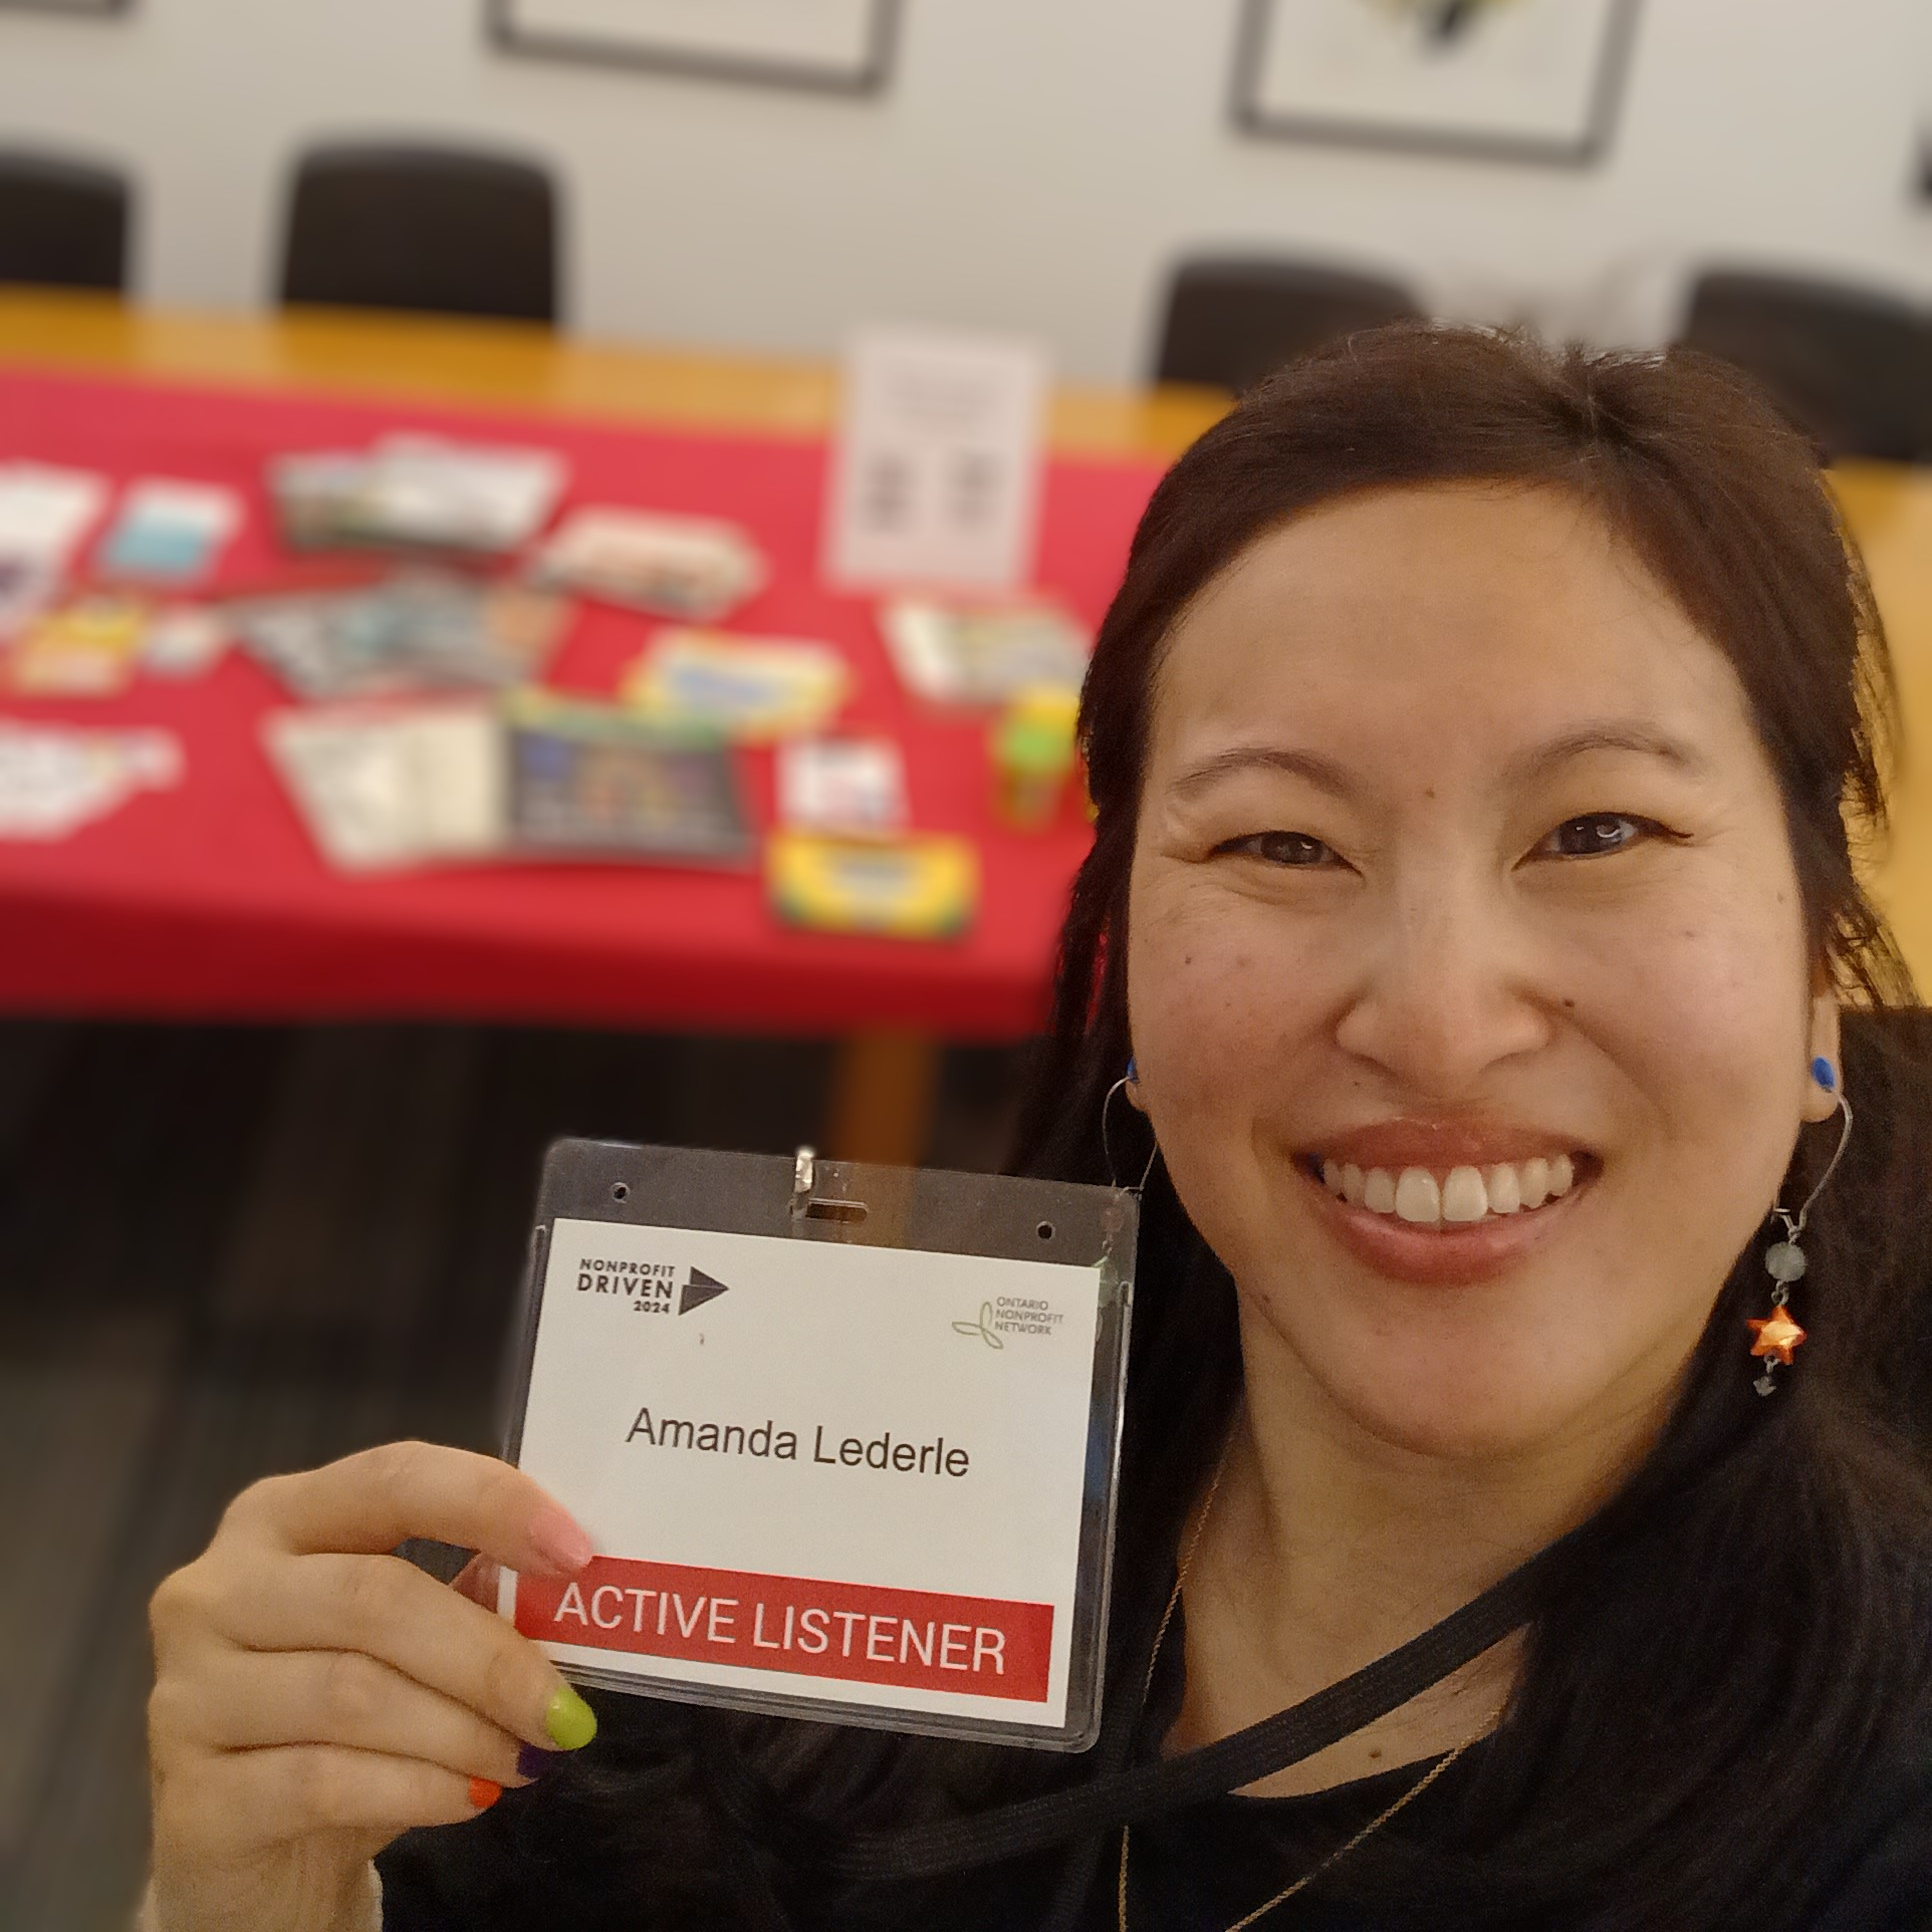 Amanda smiles at the camera while holding their conference badge with their name and Active Listener title. Behind them is a blurred background of their resource table.